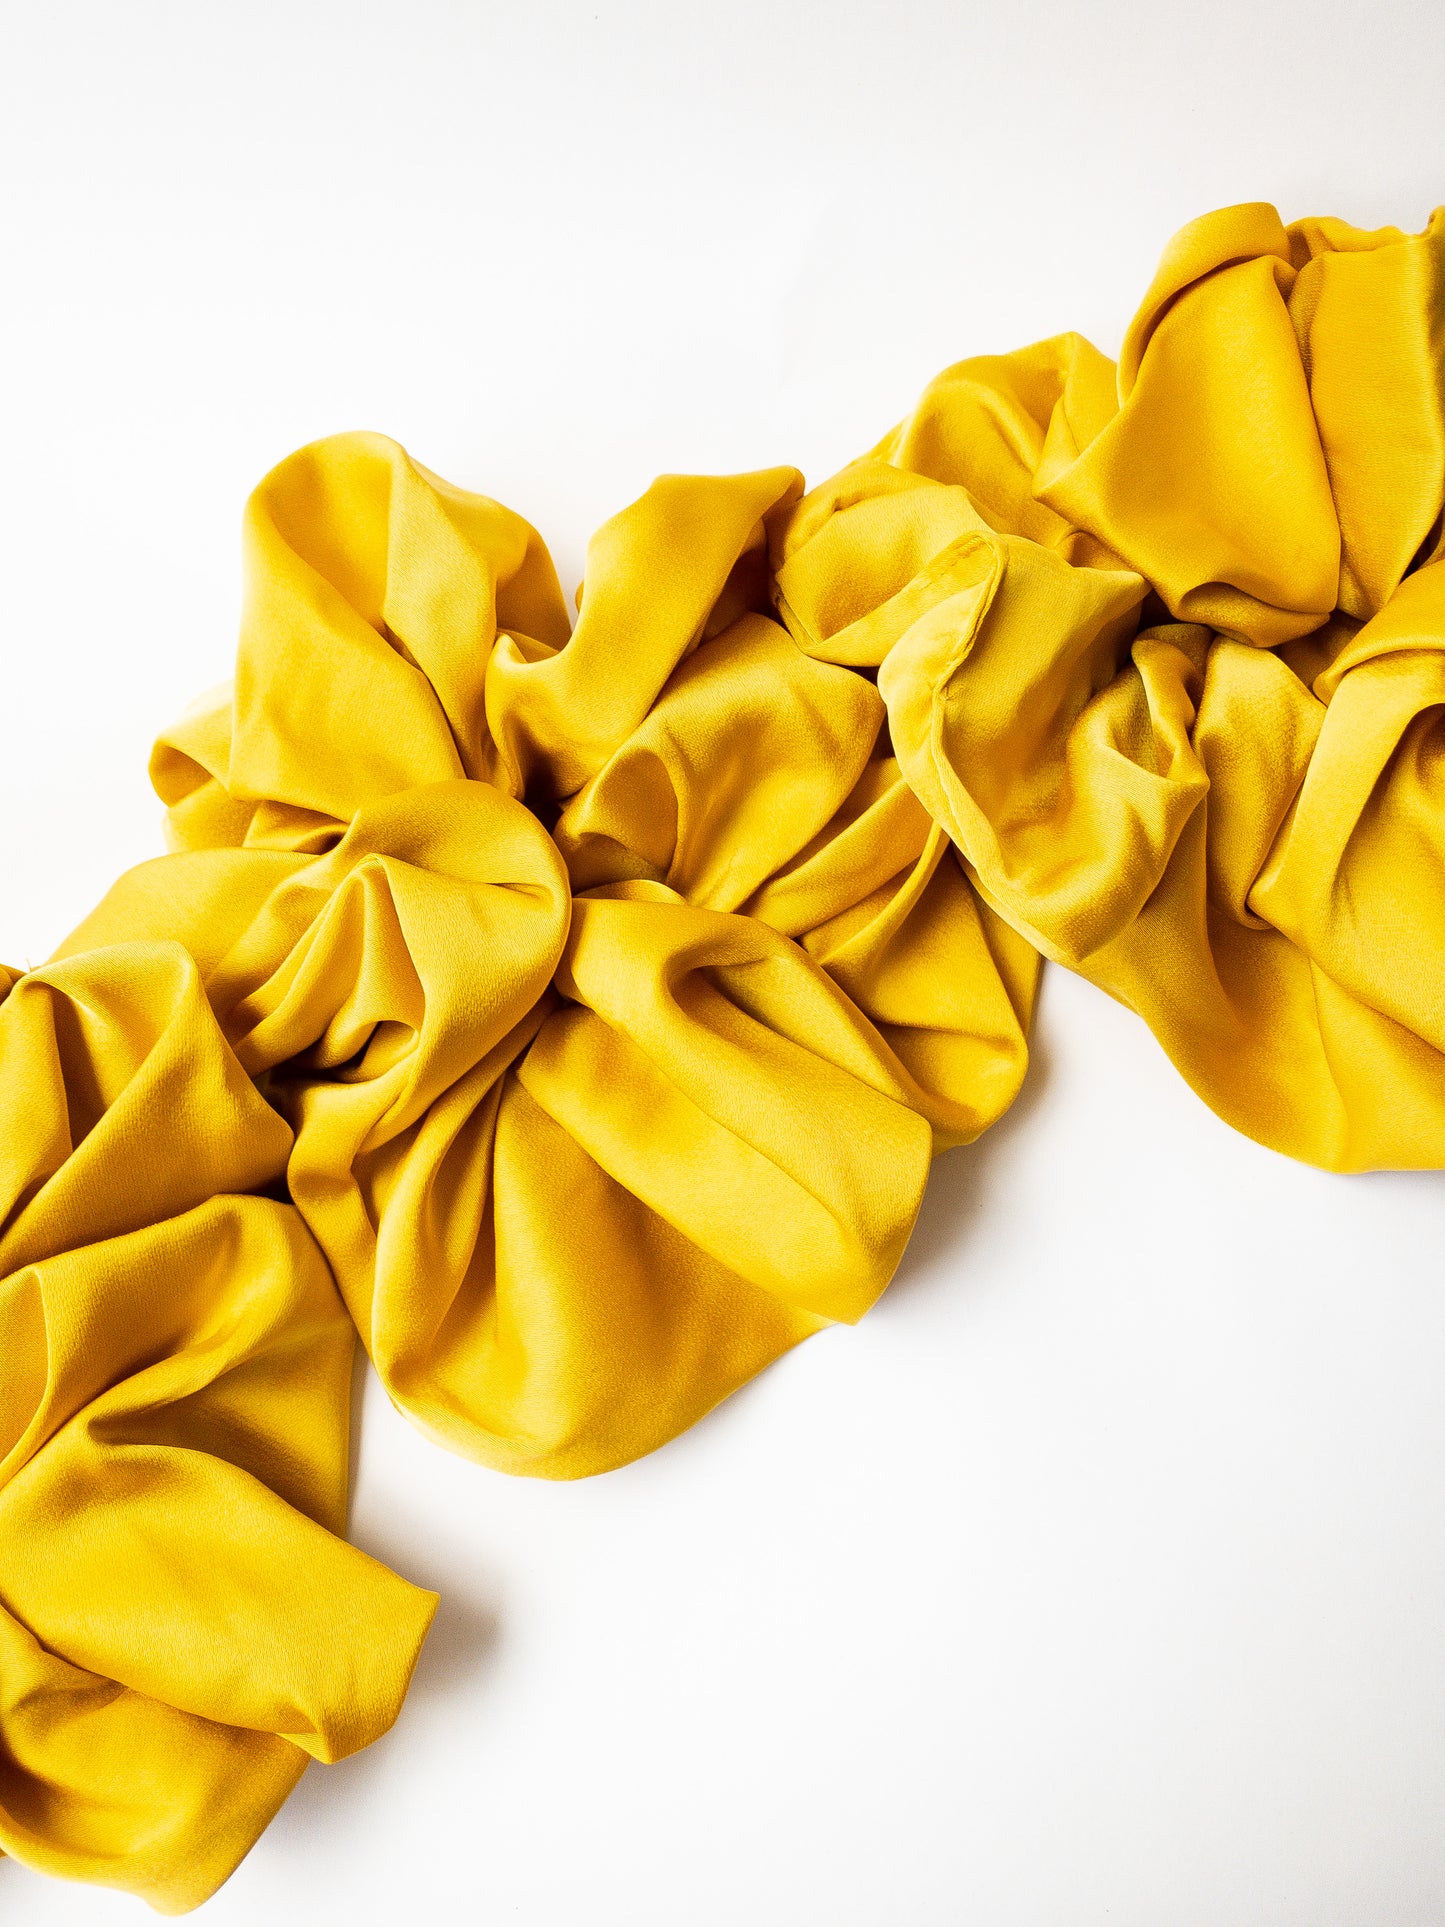 Rich and buttery soft jumbo oversized scrunchie in a beautiful turmeric yellow sheen. Perfect for holding curls and easily creating a romantic hairstyle. 